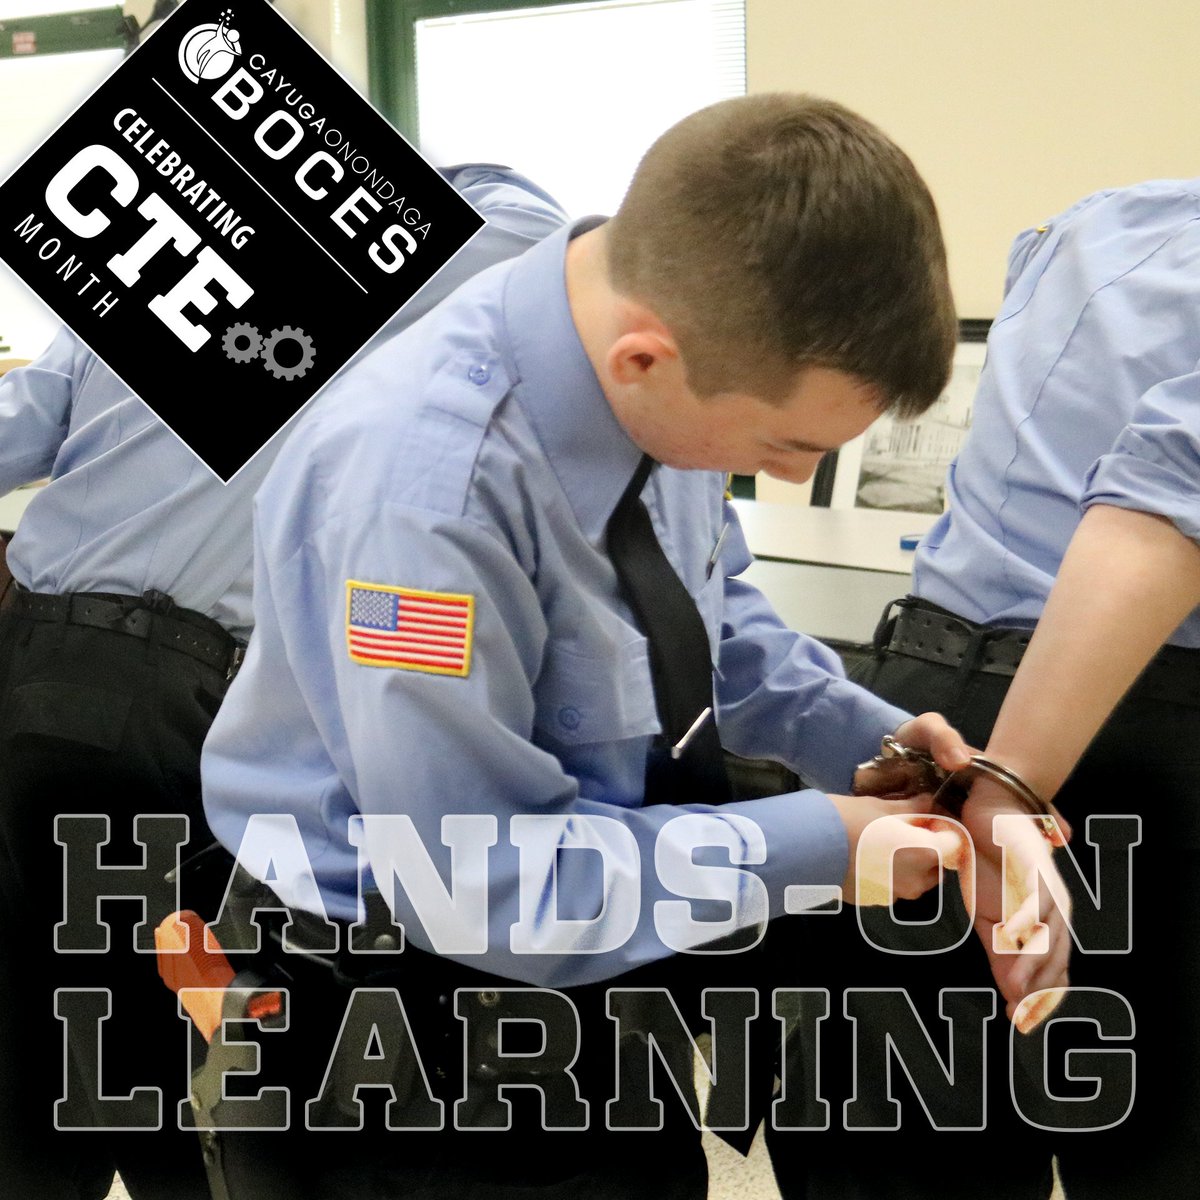 Our Criminal Justice program is full of hands-on learning opportunities! Students practice handcuffing, criminal takedown tactical training, fingerprinting, and self-defense. To learn more, visit: cayboces.org/Page/164 #CTEMonth